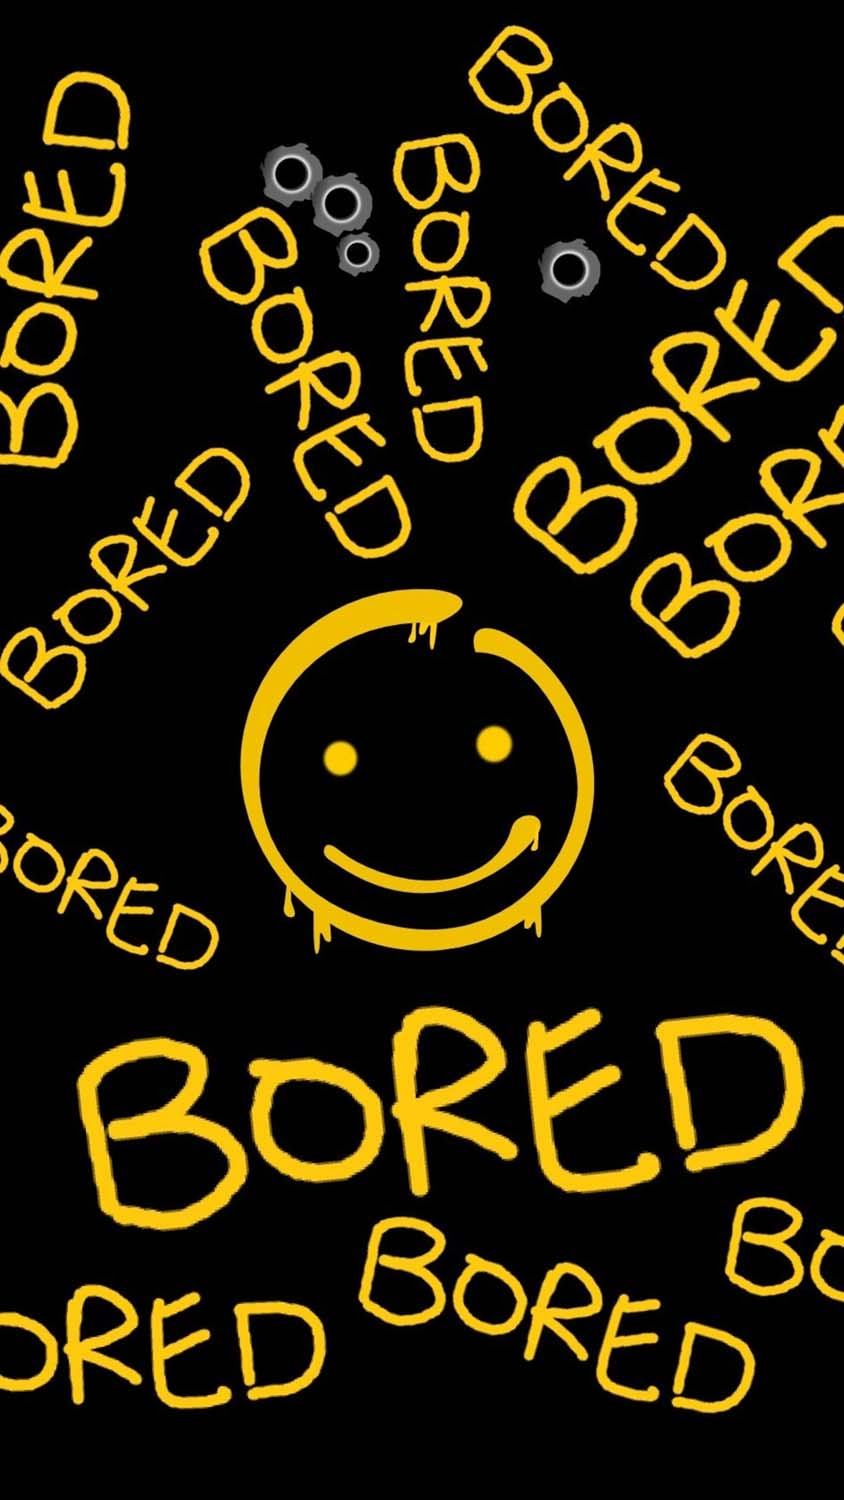 Bored Typography iPhone Wallpaper 4K  iPhone Wallpapers